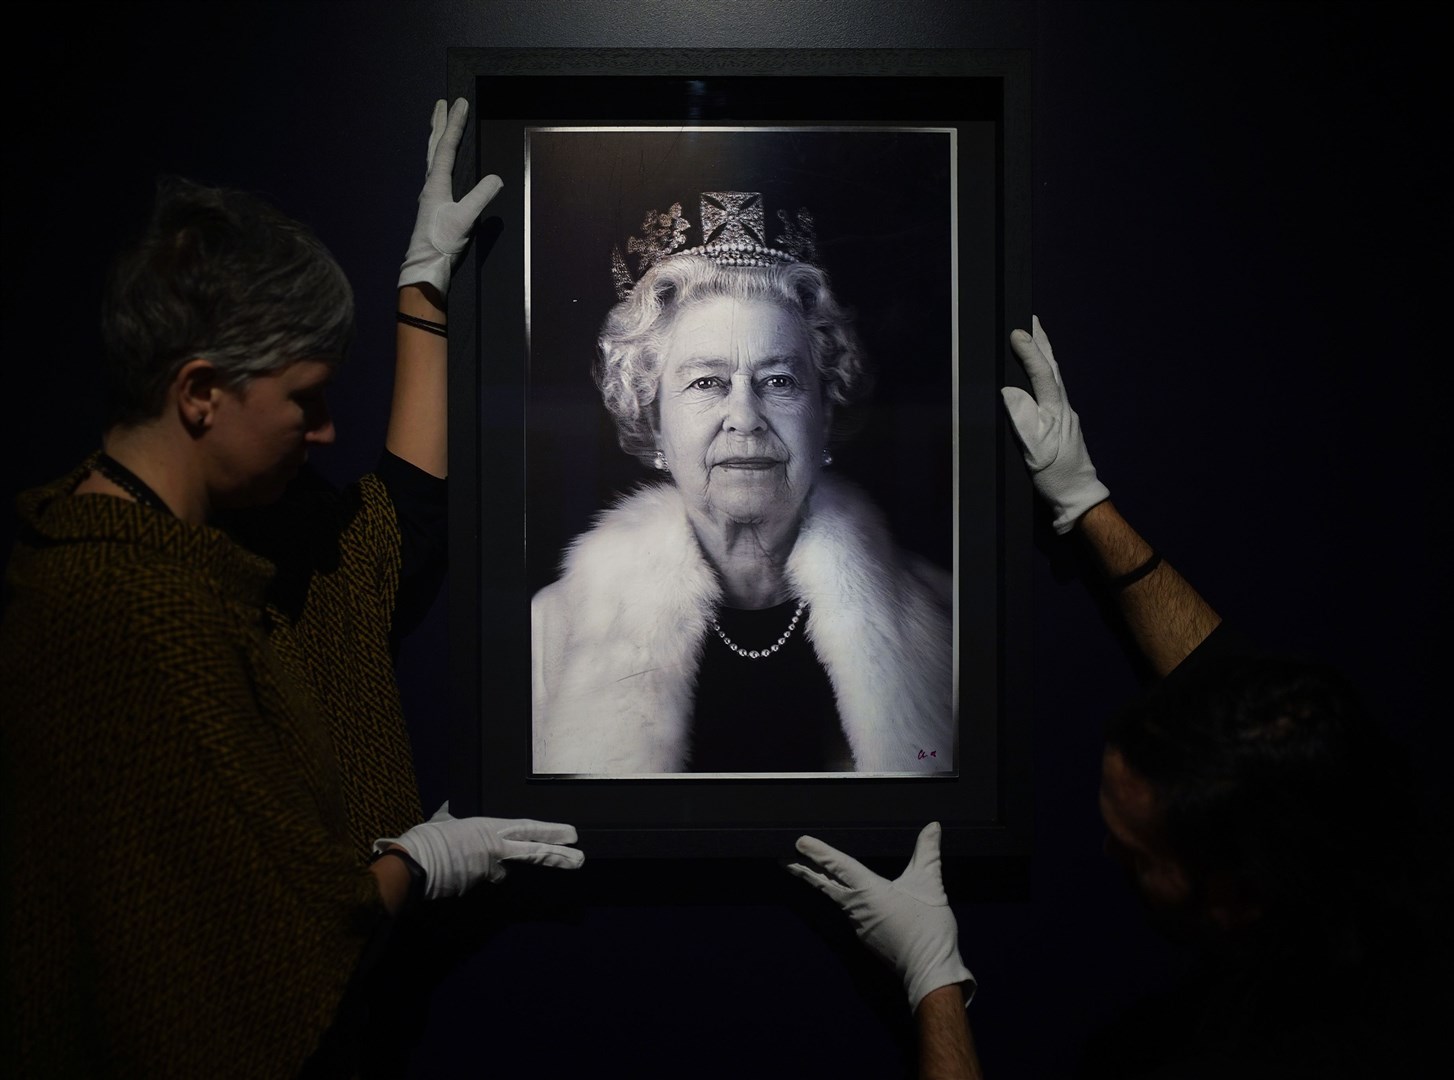 One of many events celebrating the Platinum Jubilee was the Life Through A Royal Lens exhibition at Kensington Palace. Here, conservators handle a lenticular print, Queen Elizabeth II, In Lightness of Being, taken by light artist Chris Levine in 2004 (Yui Mok/PA)